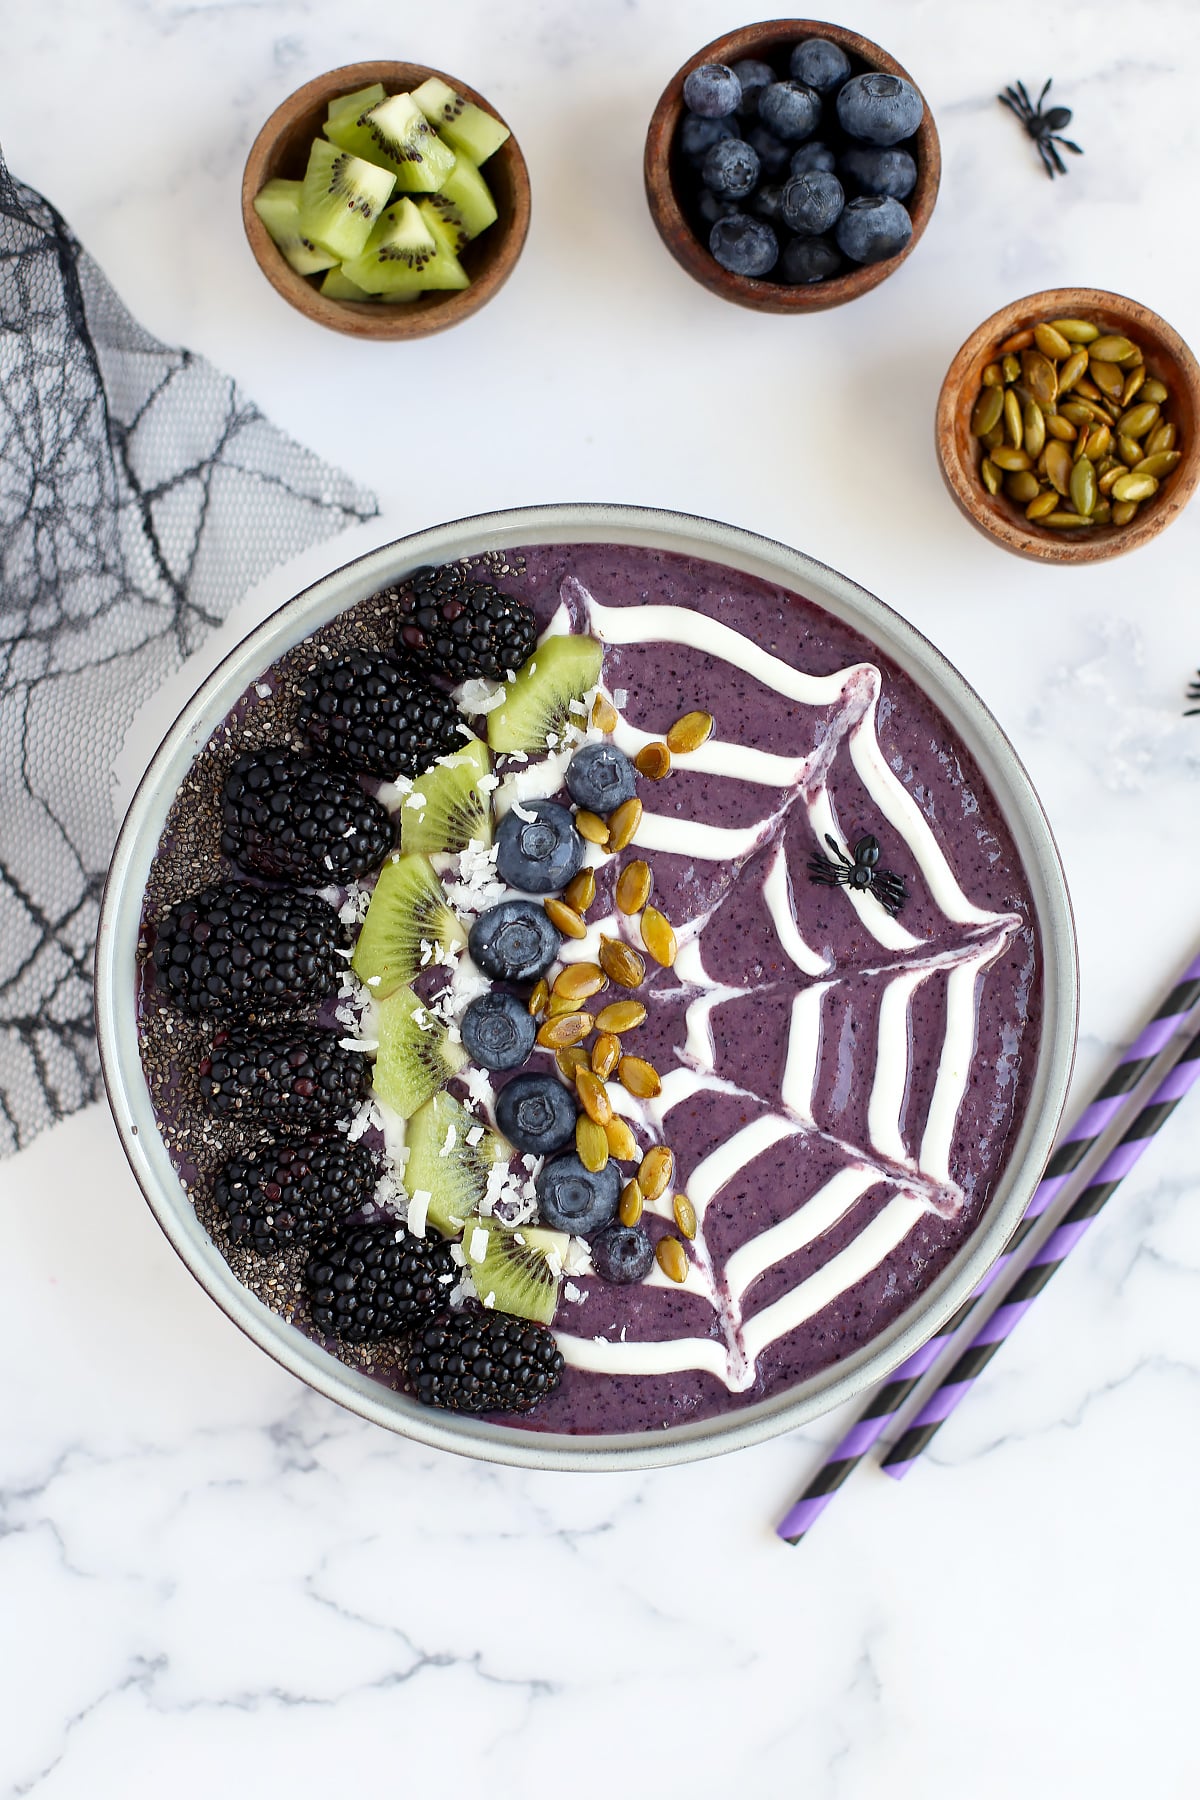 A bowl filled with a blueberry smoothie and topped with a spooky design and fresh fruit.